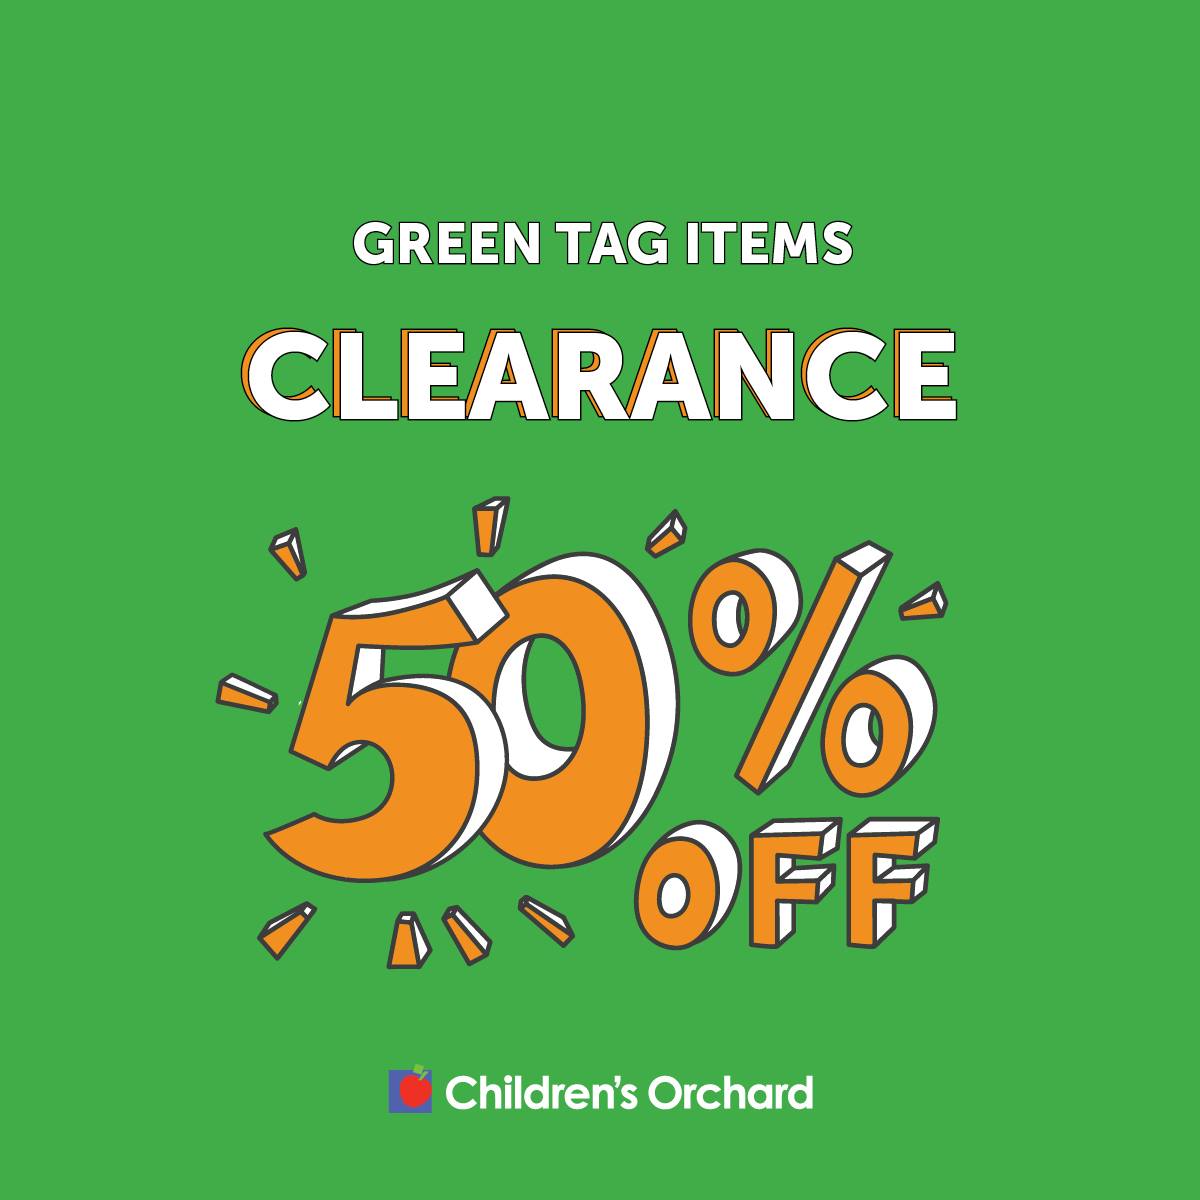 Clearance: 50% off green tag items.